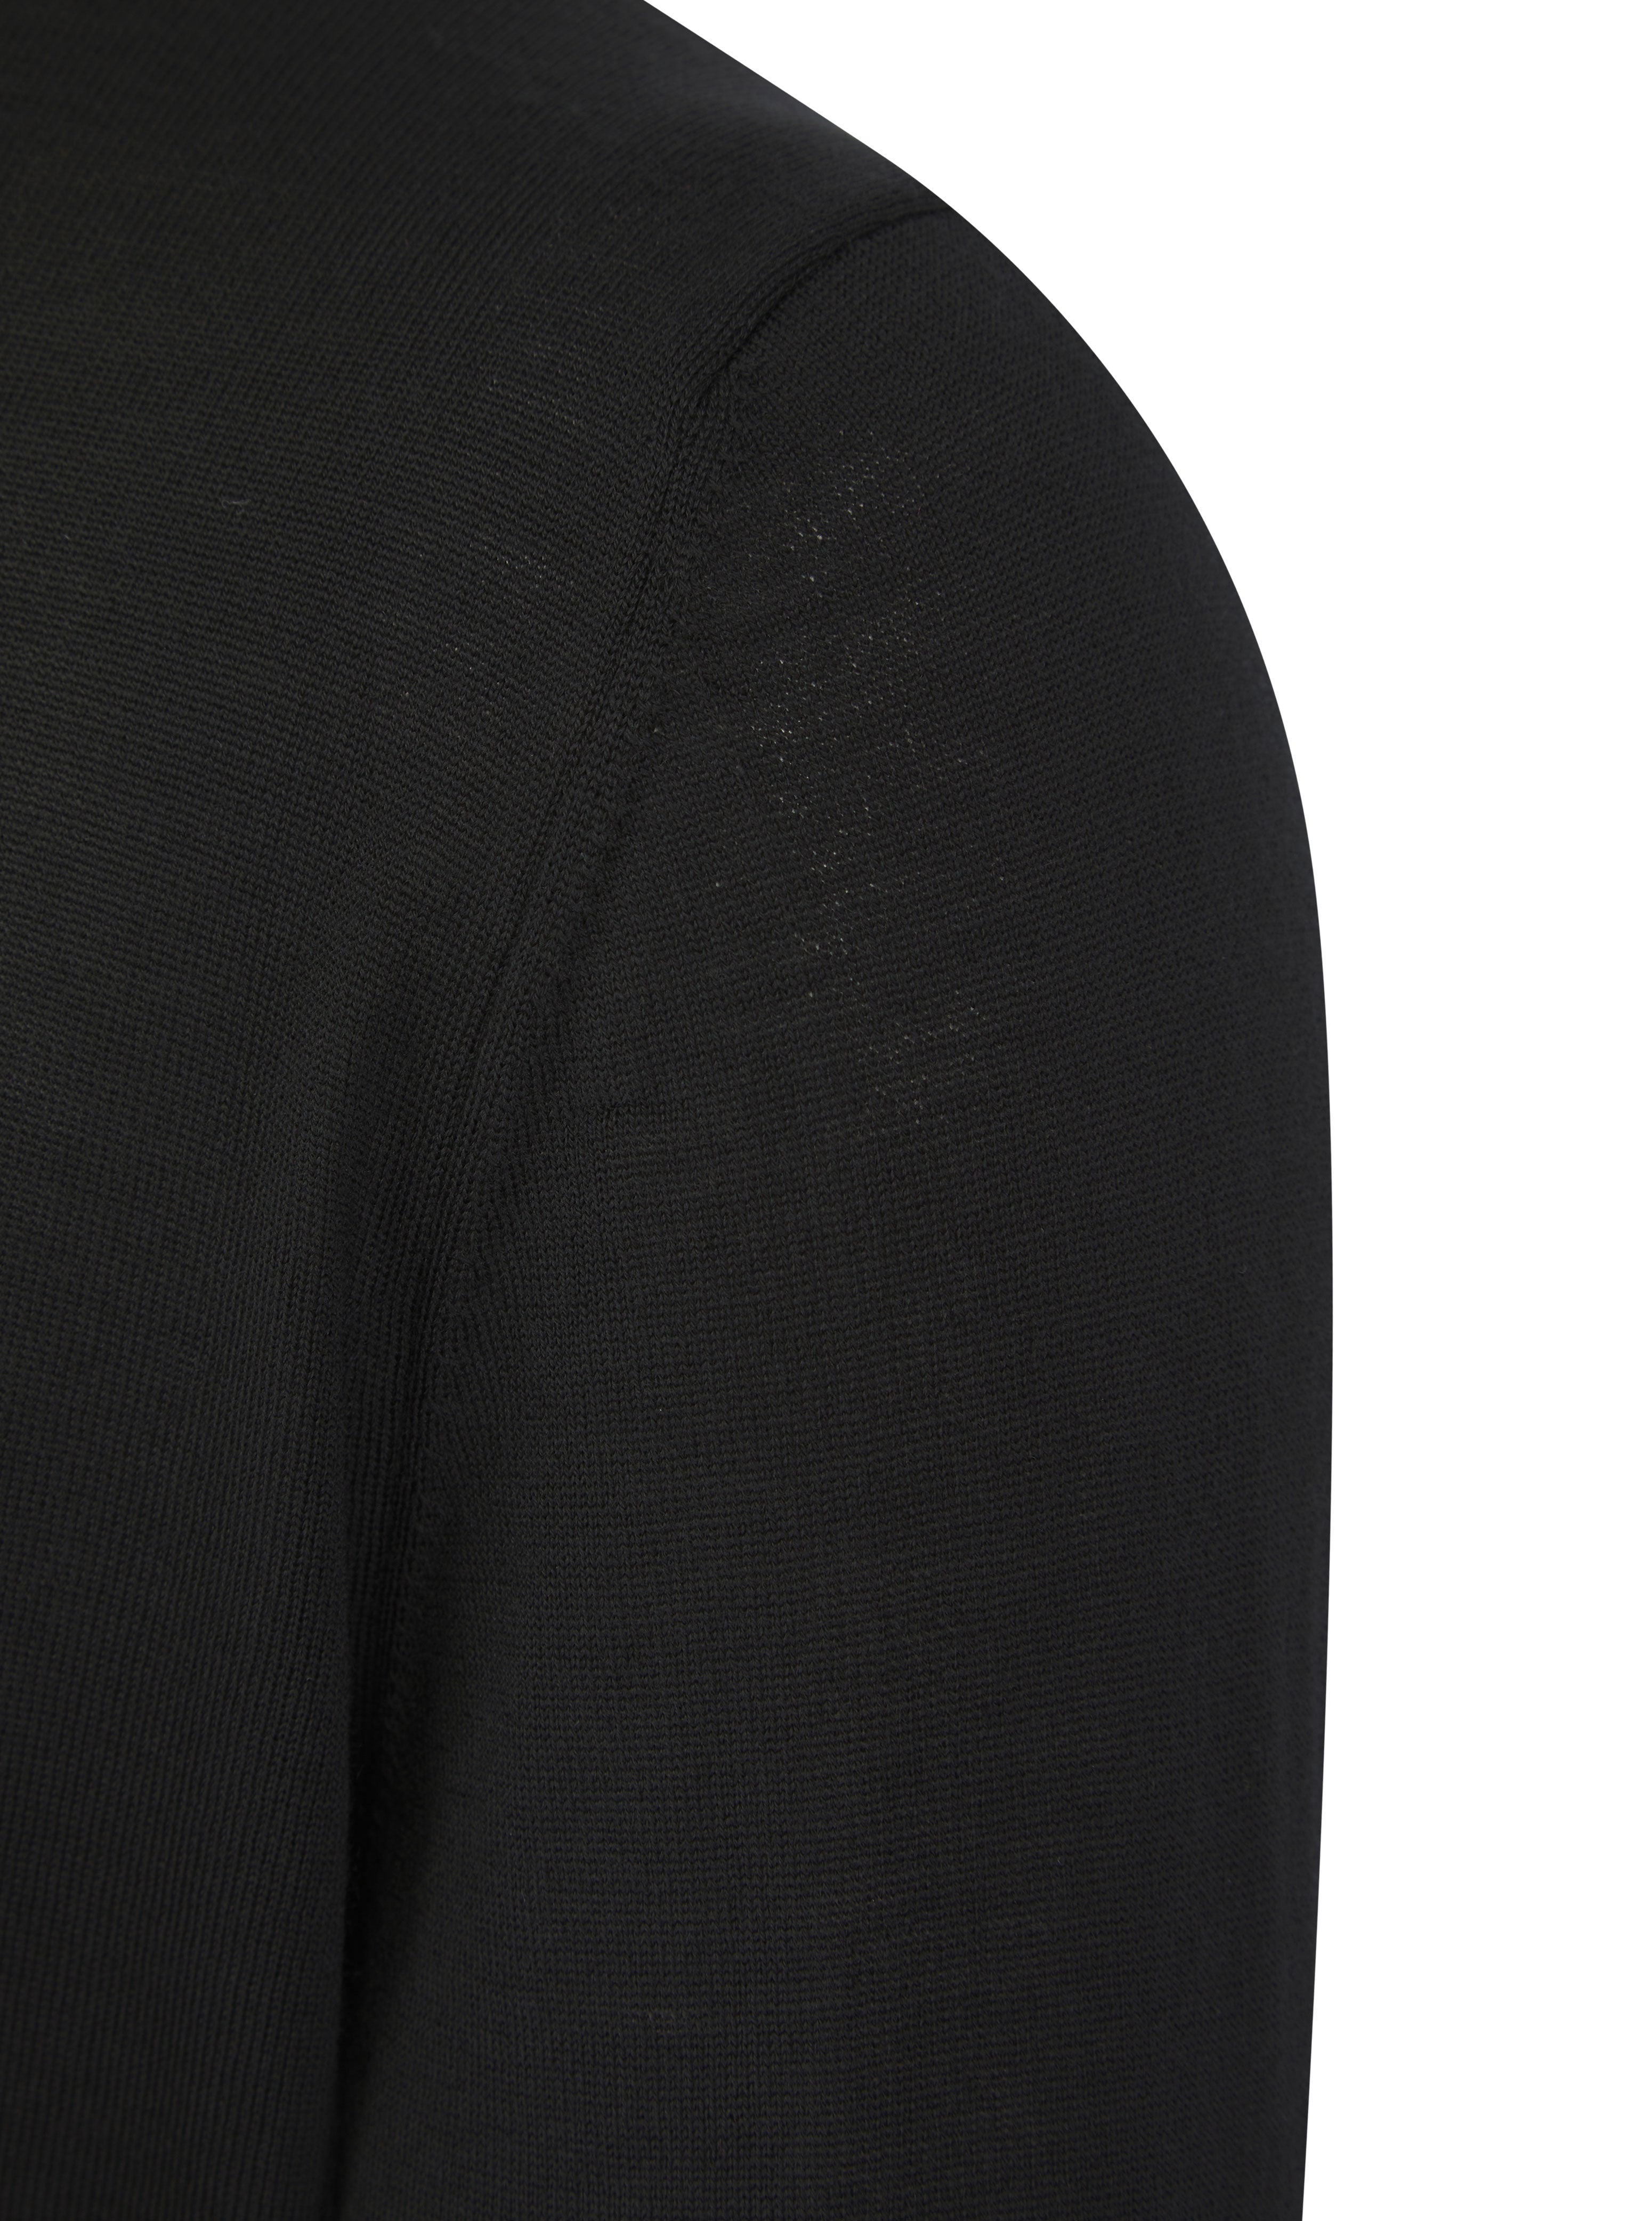 Load image into Gallery viewer, Oliver Sweeney Curragh 1/4 Zip Knit Black
